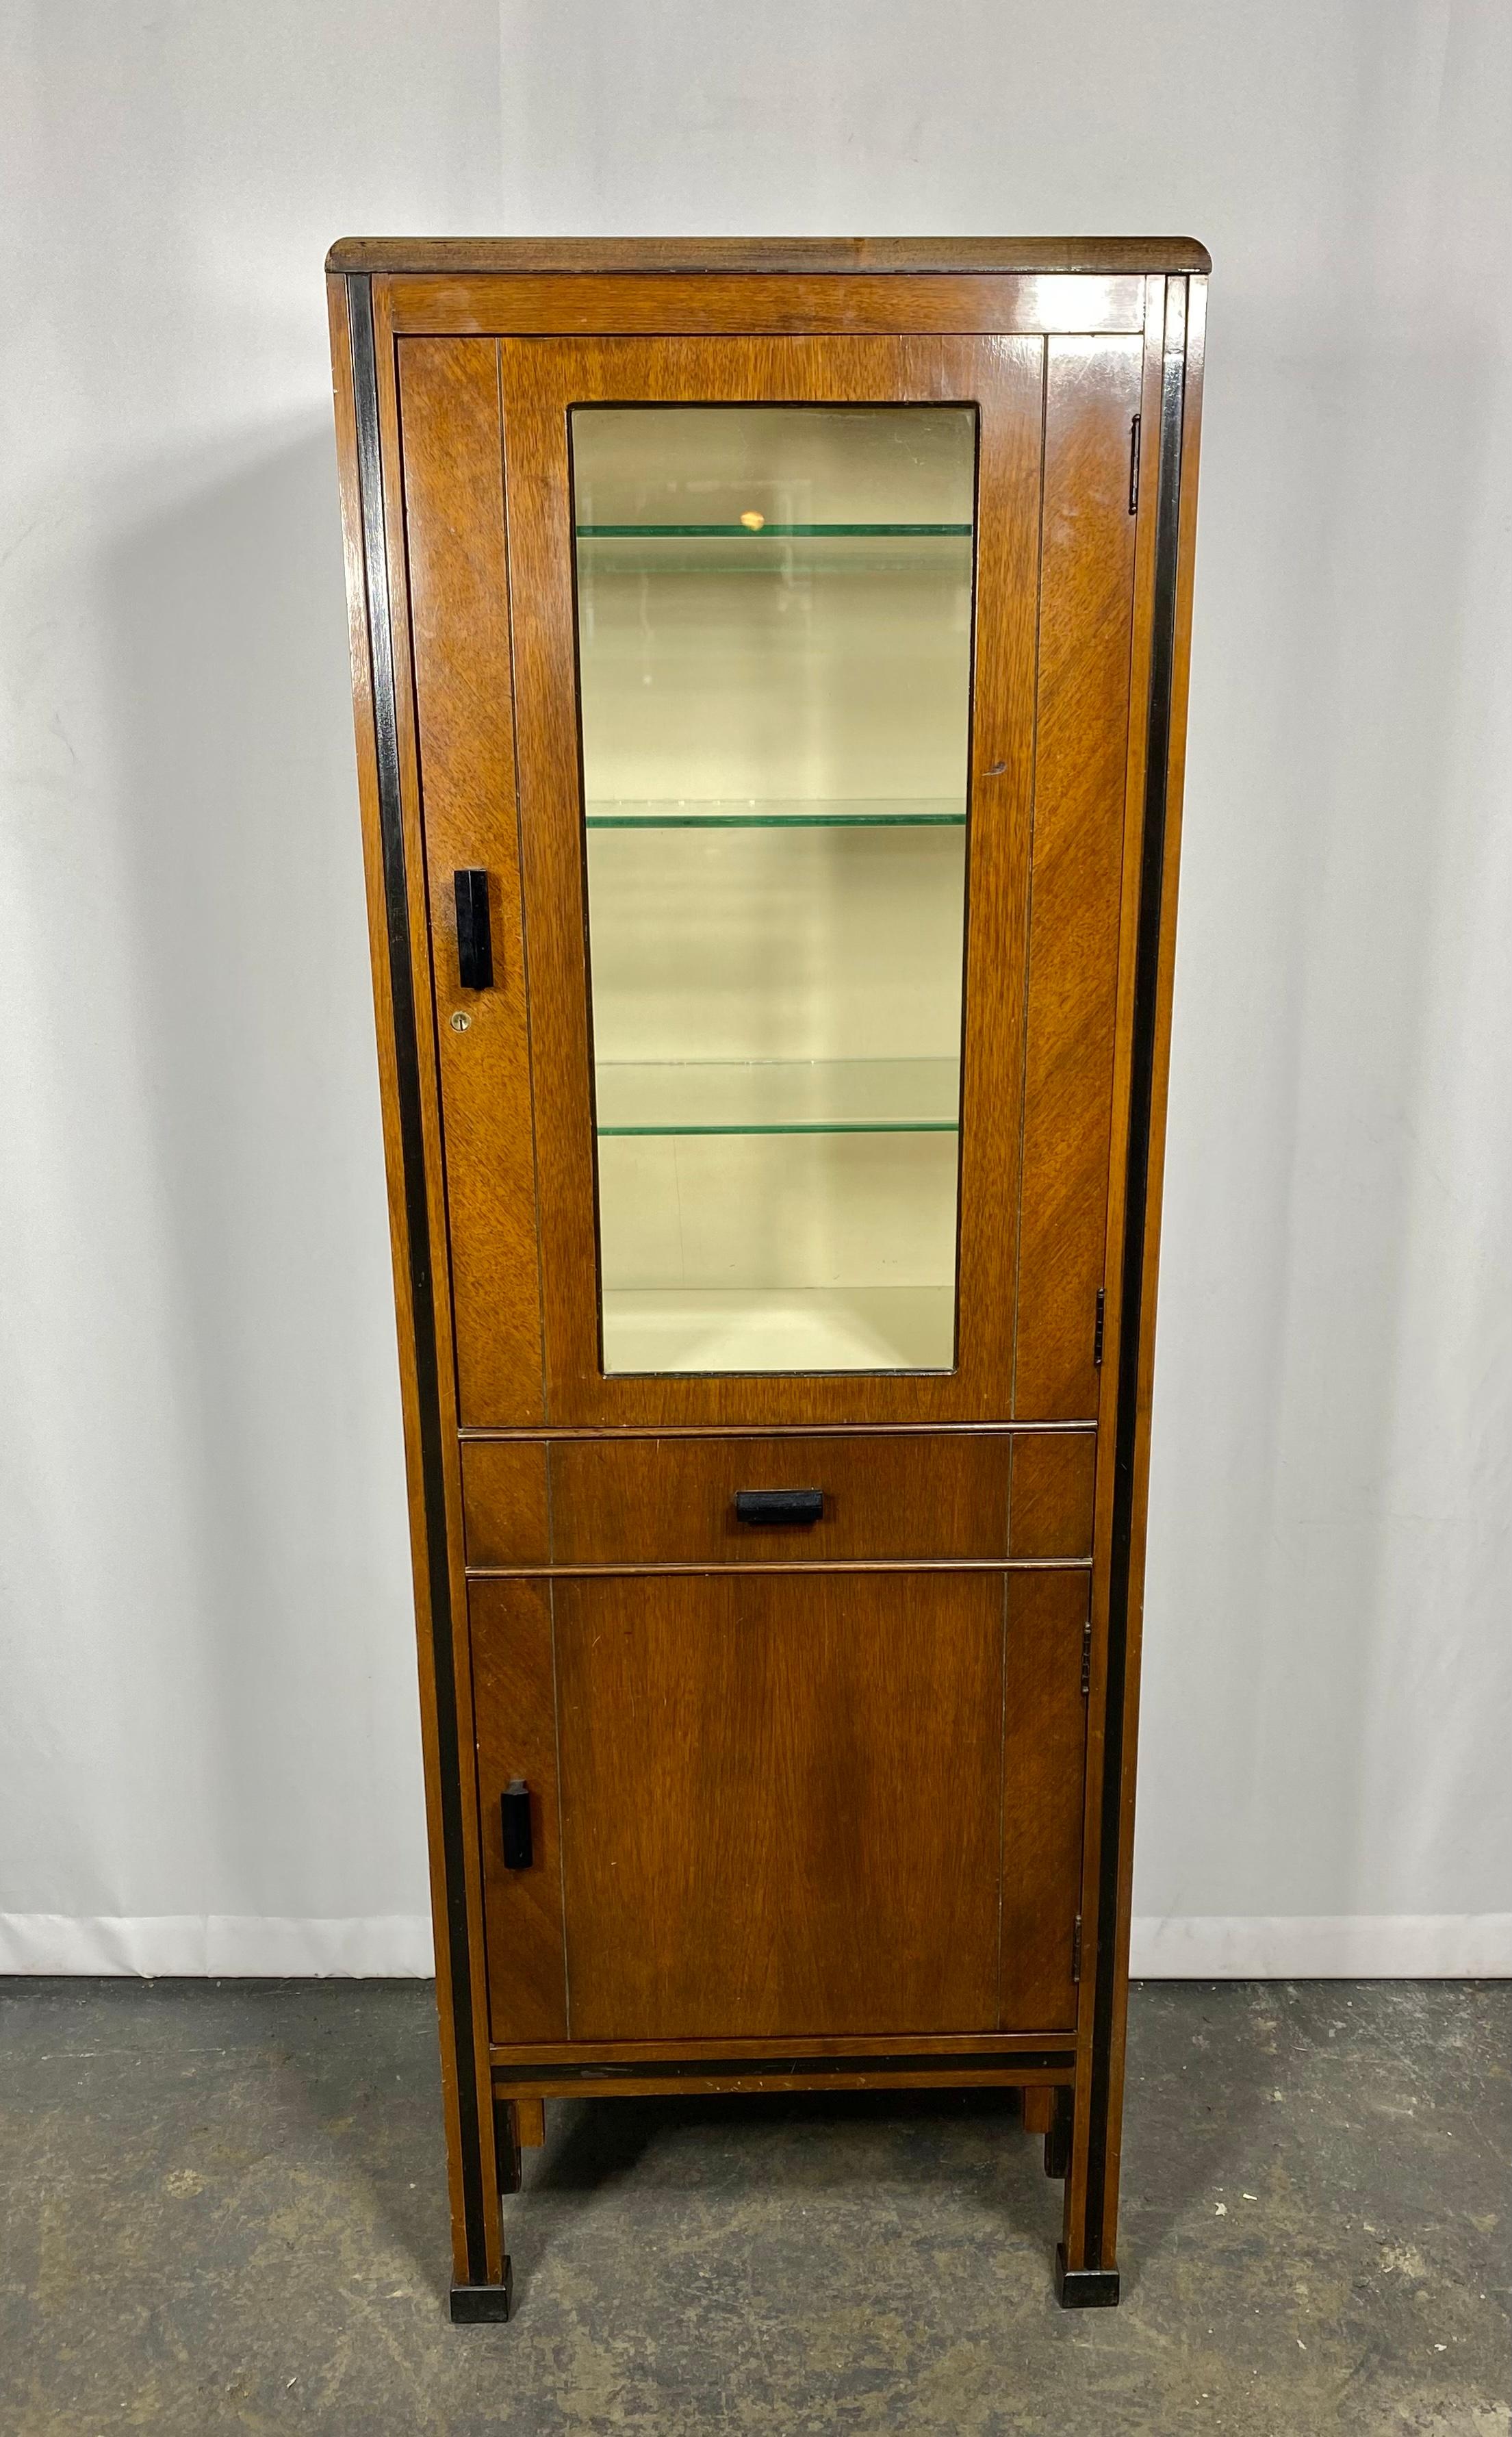 Elegant Art Deco Dental cabinet, walnut and glass, manufactured by ENOCHS,, Great decorative item,, perfect scale.. Be wonderful in a bathroom , kitchen entry space, Classic Art deco ,, modernist . streamline design,, Black lacquer details.. Hand